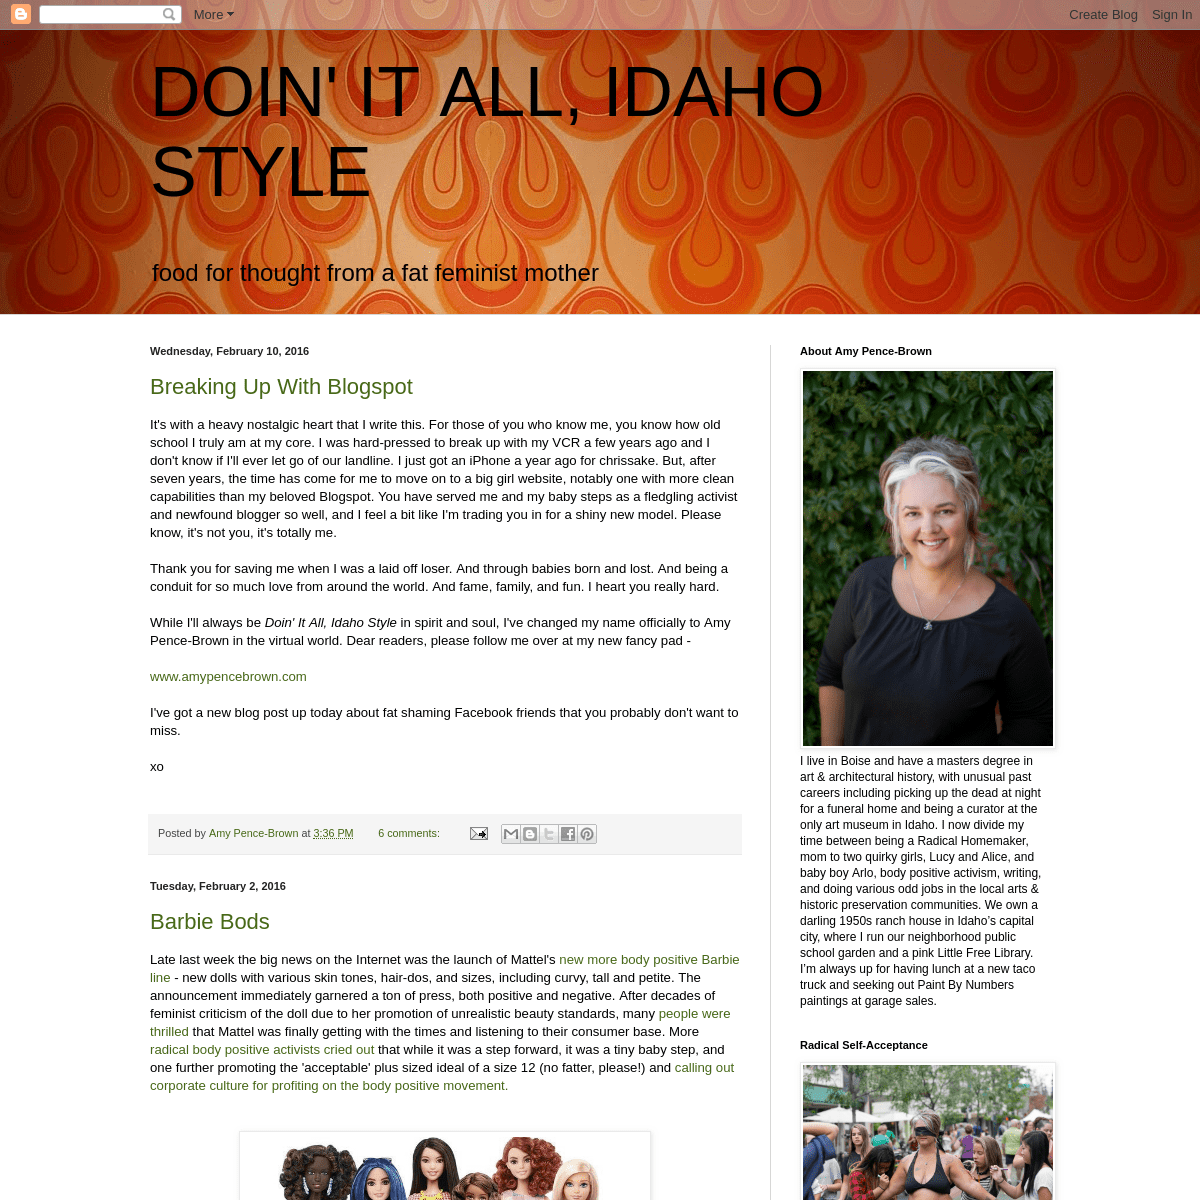 A complete backup of idaho-style.blogspot.com